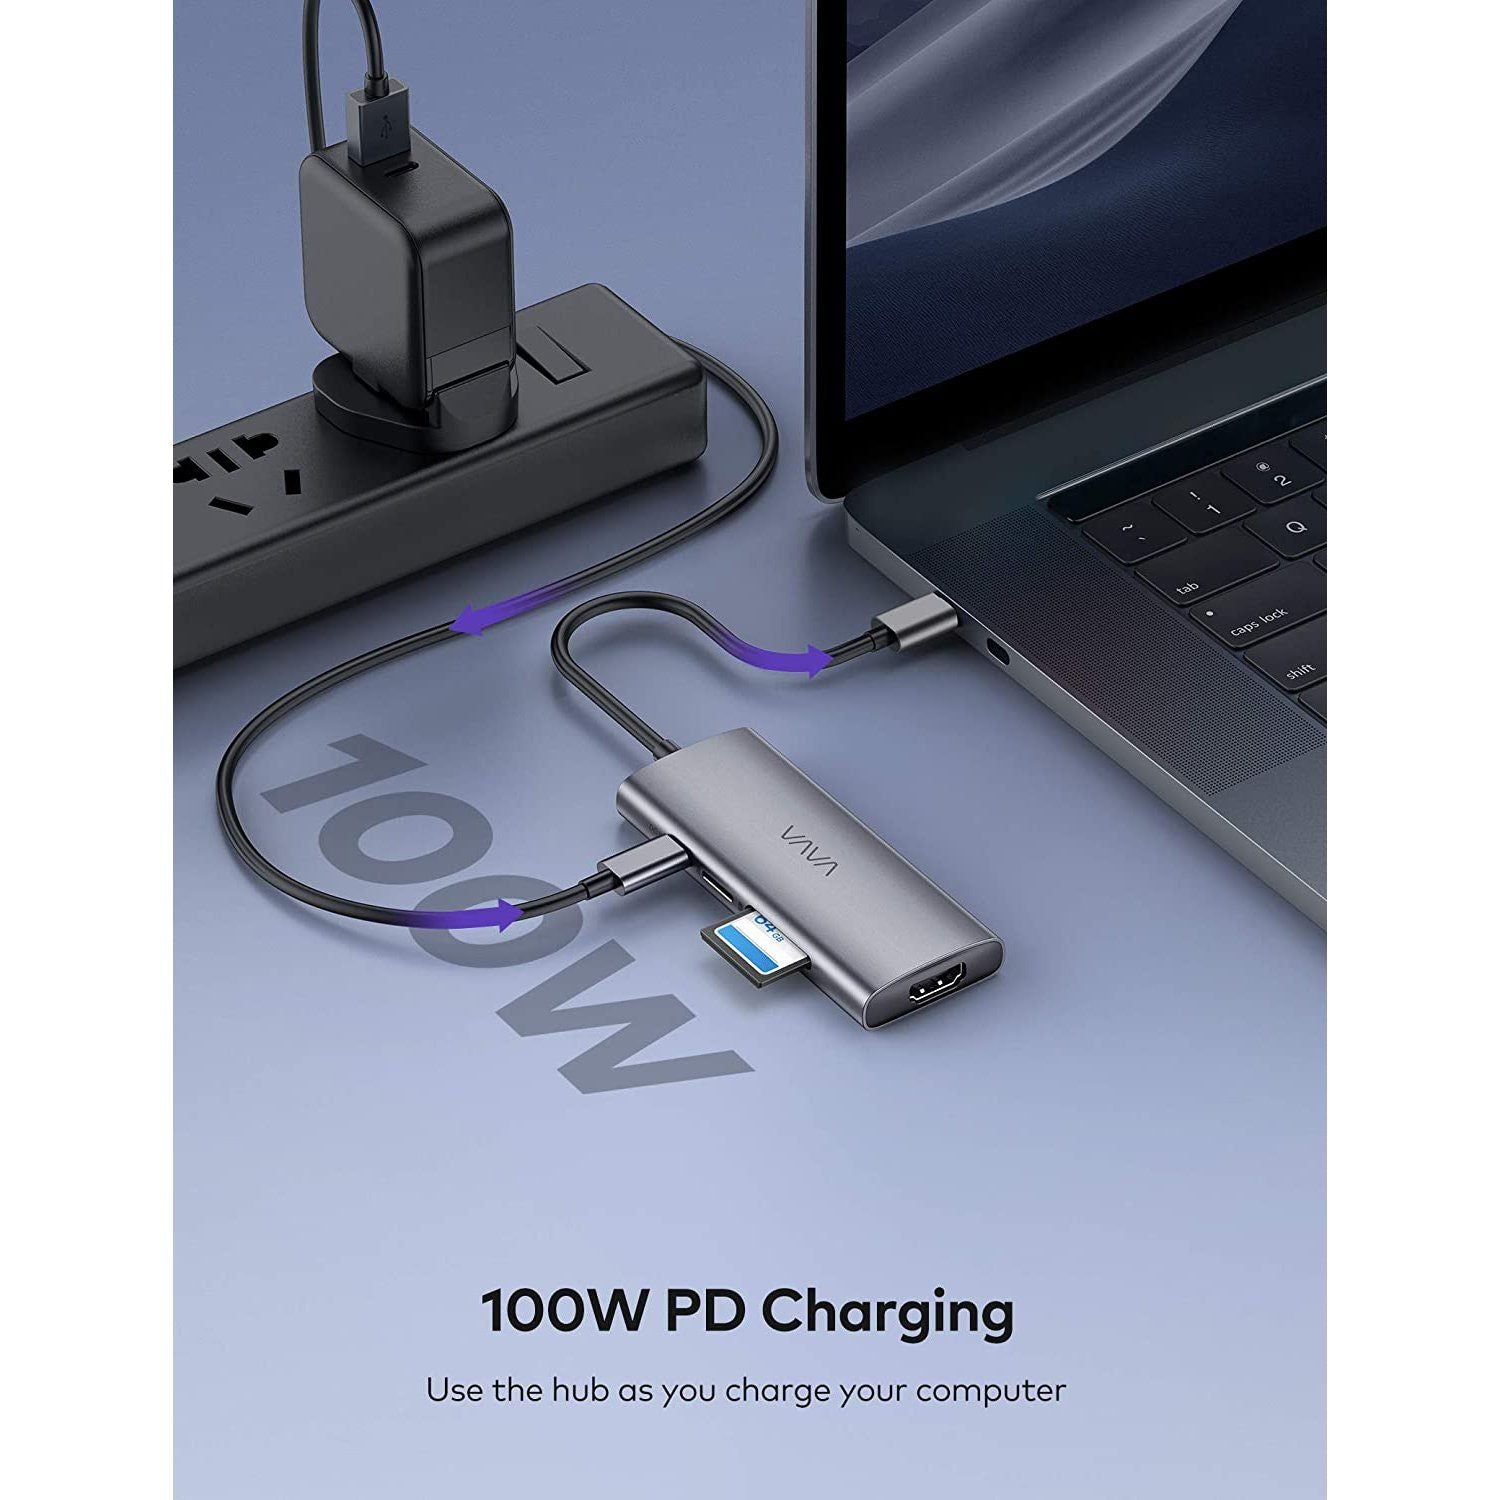 VAVA VA-UC017 7 in 1 USB C Hub with 4K USB-C to HDMI, 3 USB 3.0 Ports, SD/TF Cards Reader, 100W Power Delivery Dock, Gray Default VAVA 